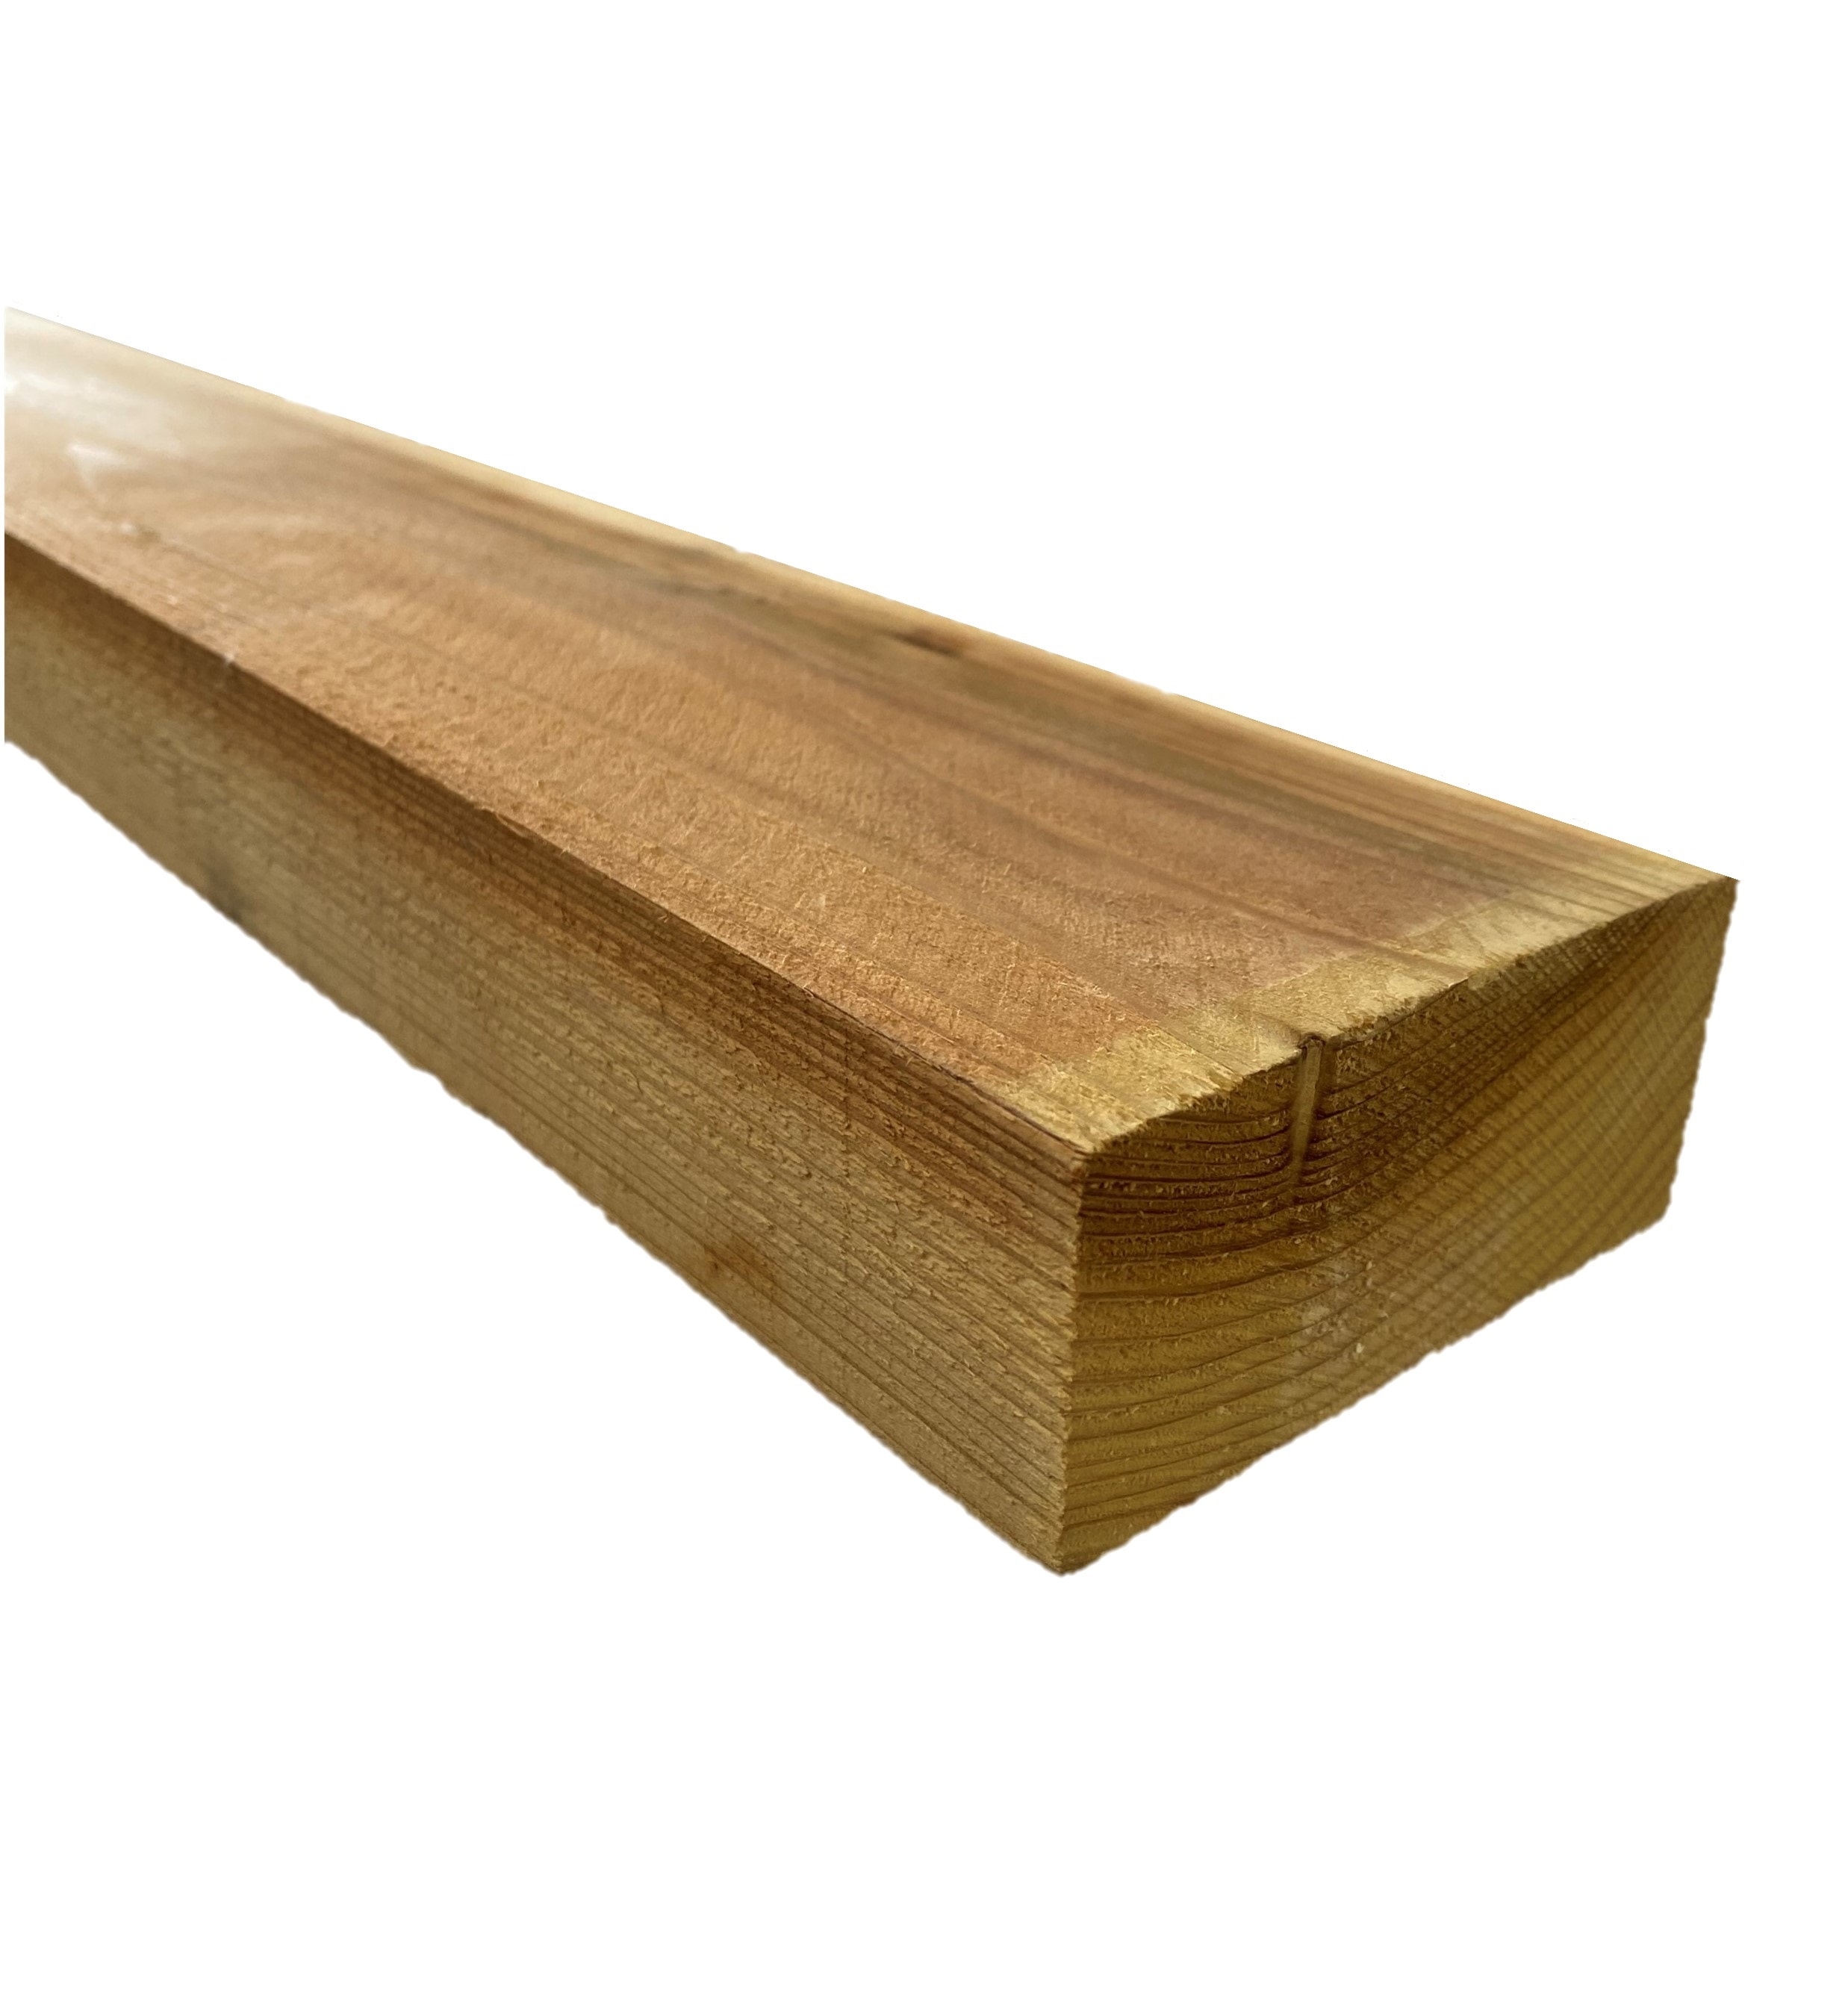 Is This The Most Expensive 2X4? 